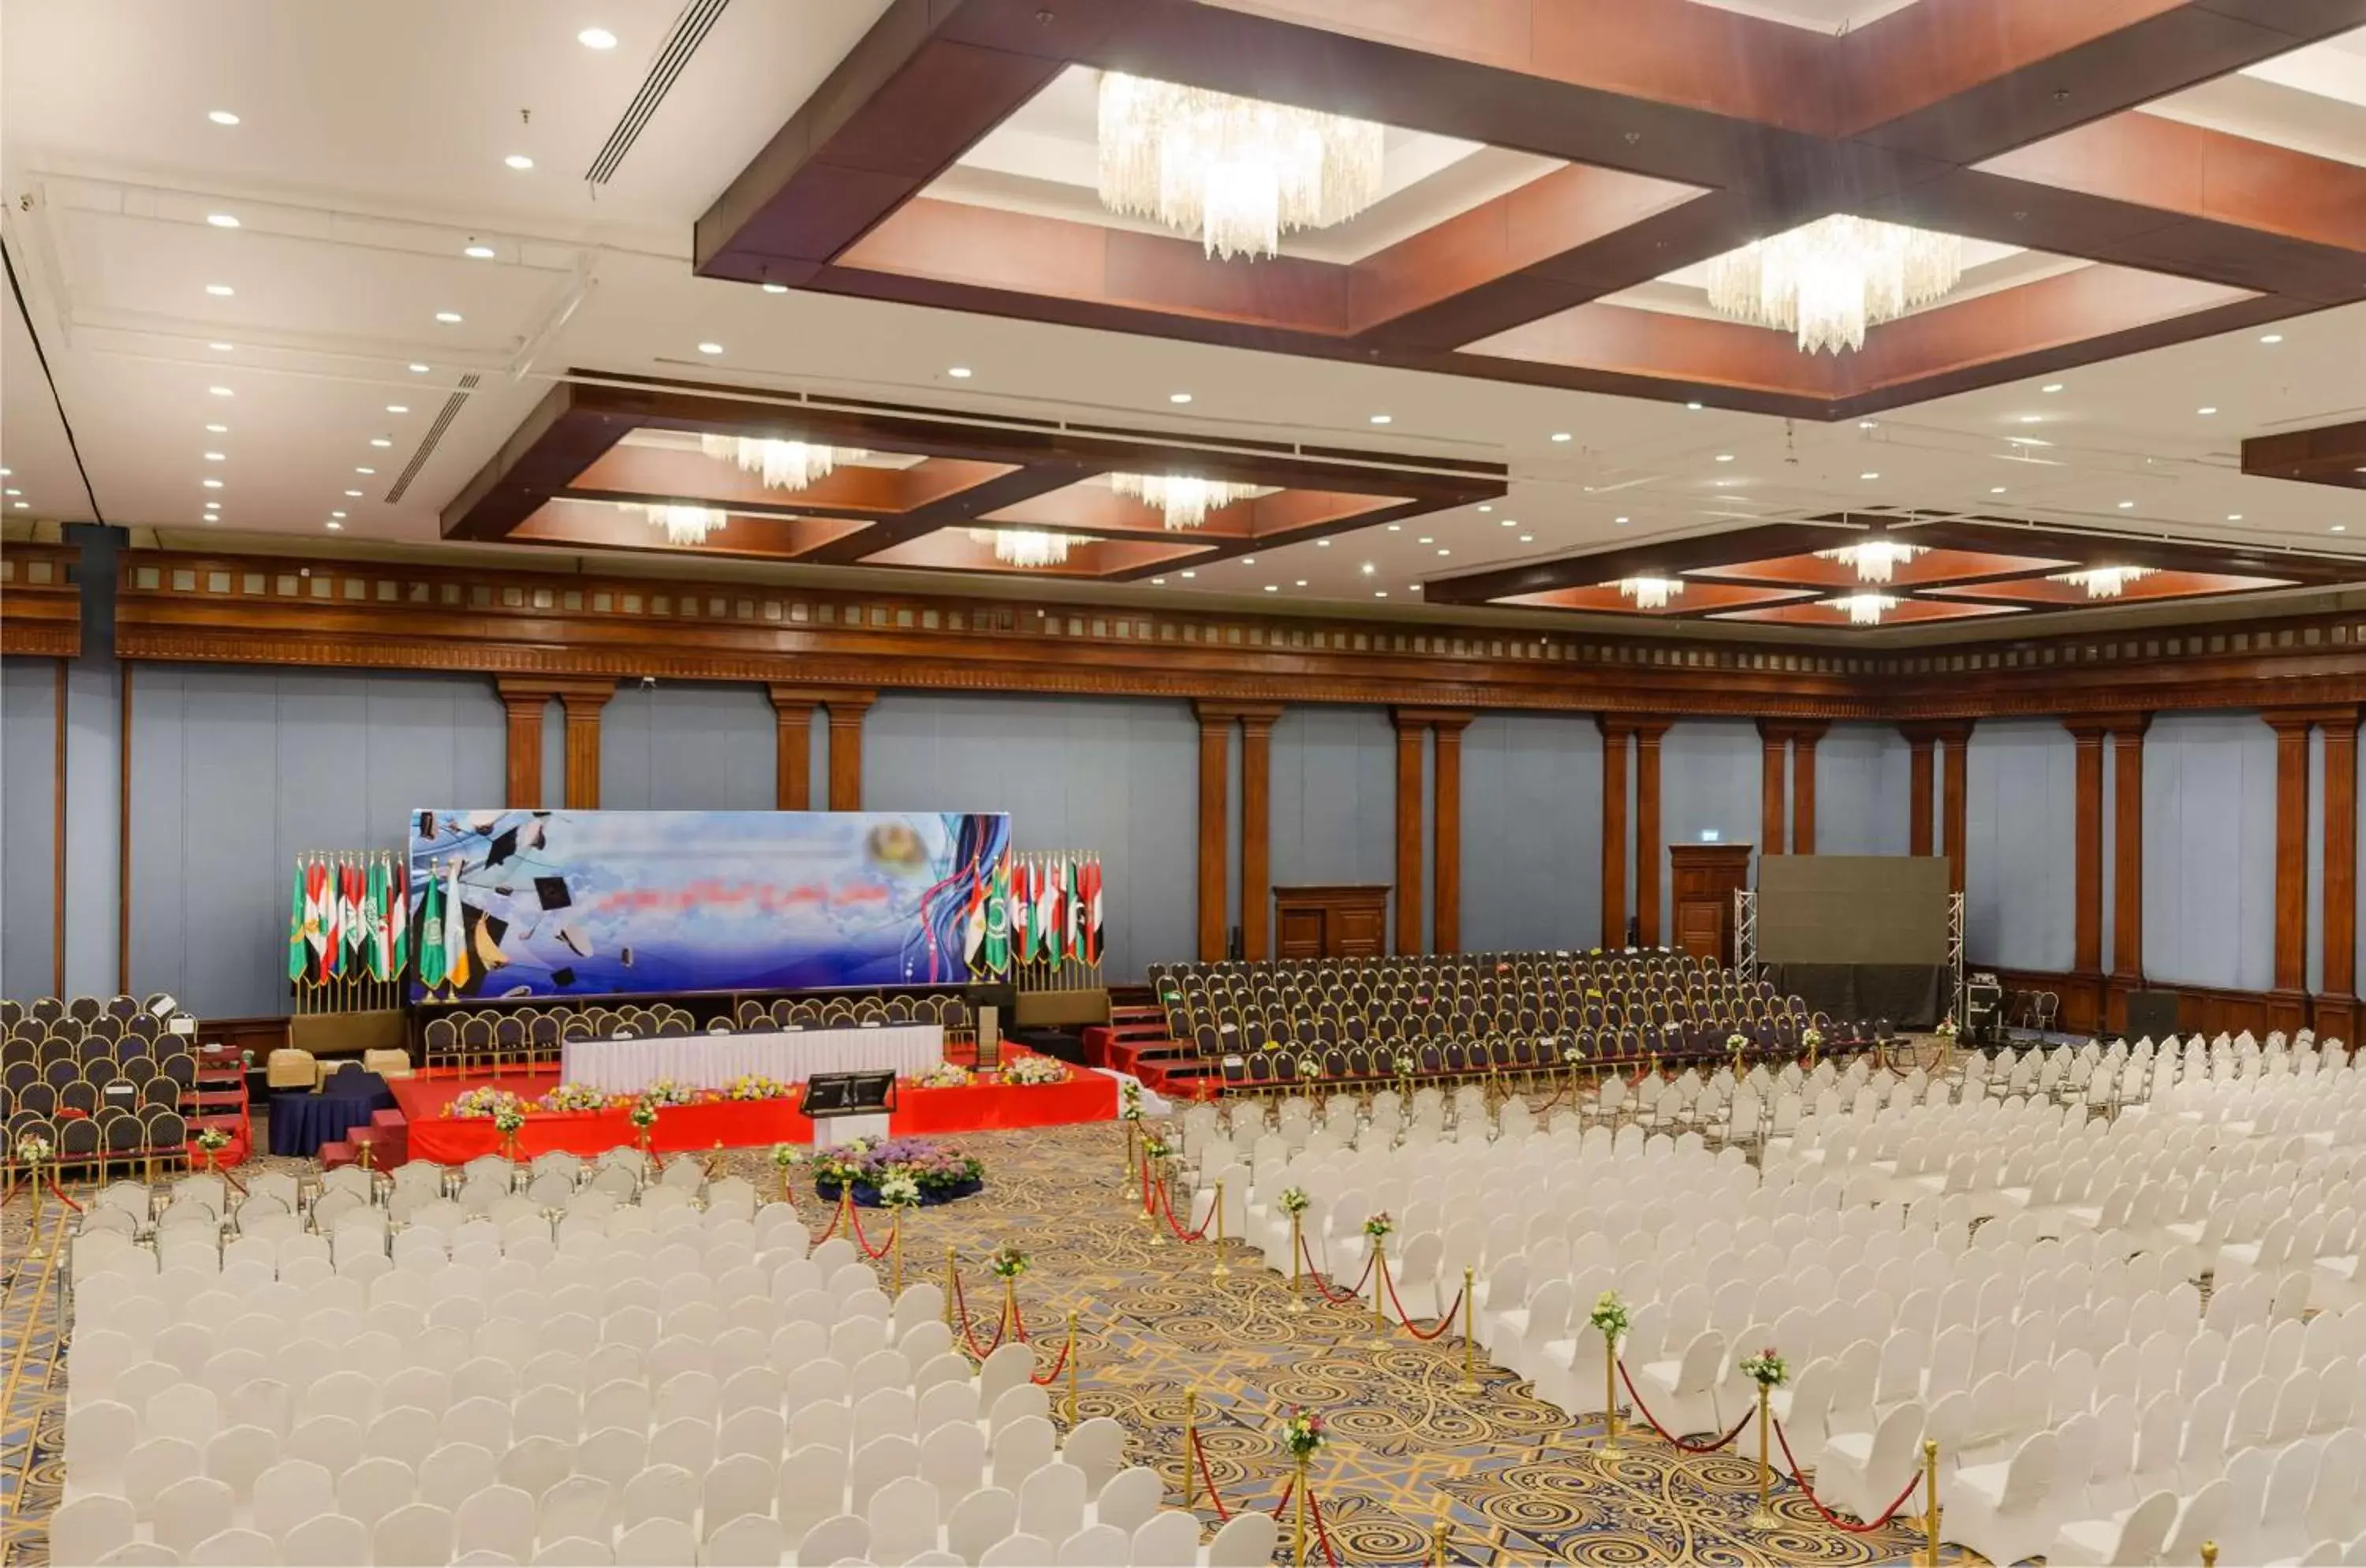 Meeting/conference room, Banquet Facilities in Hilton Alexandria Green Plaza